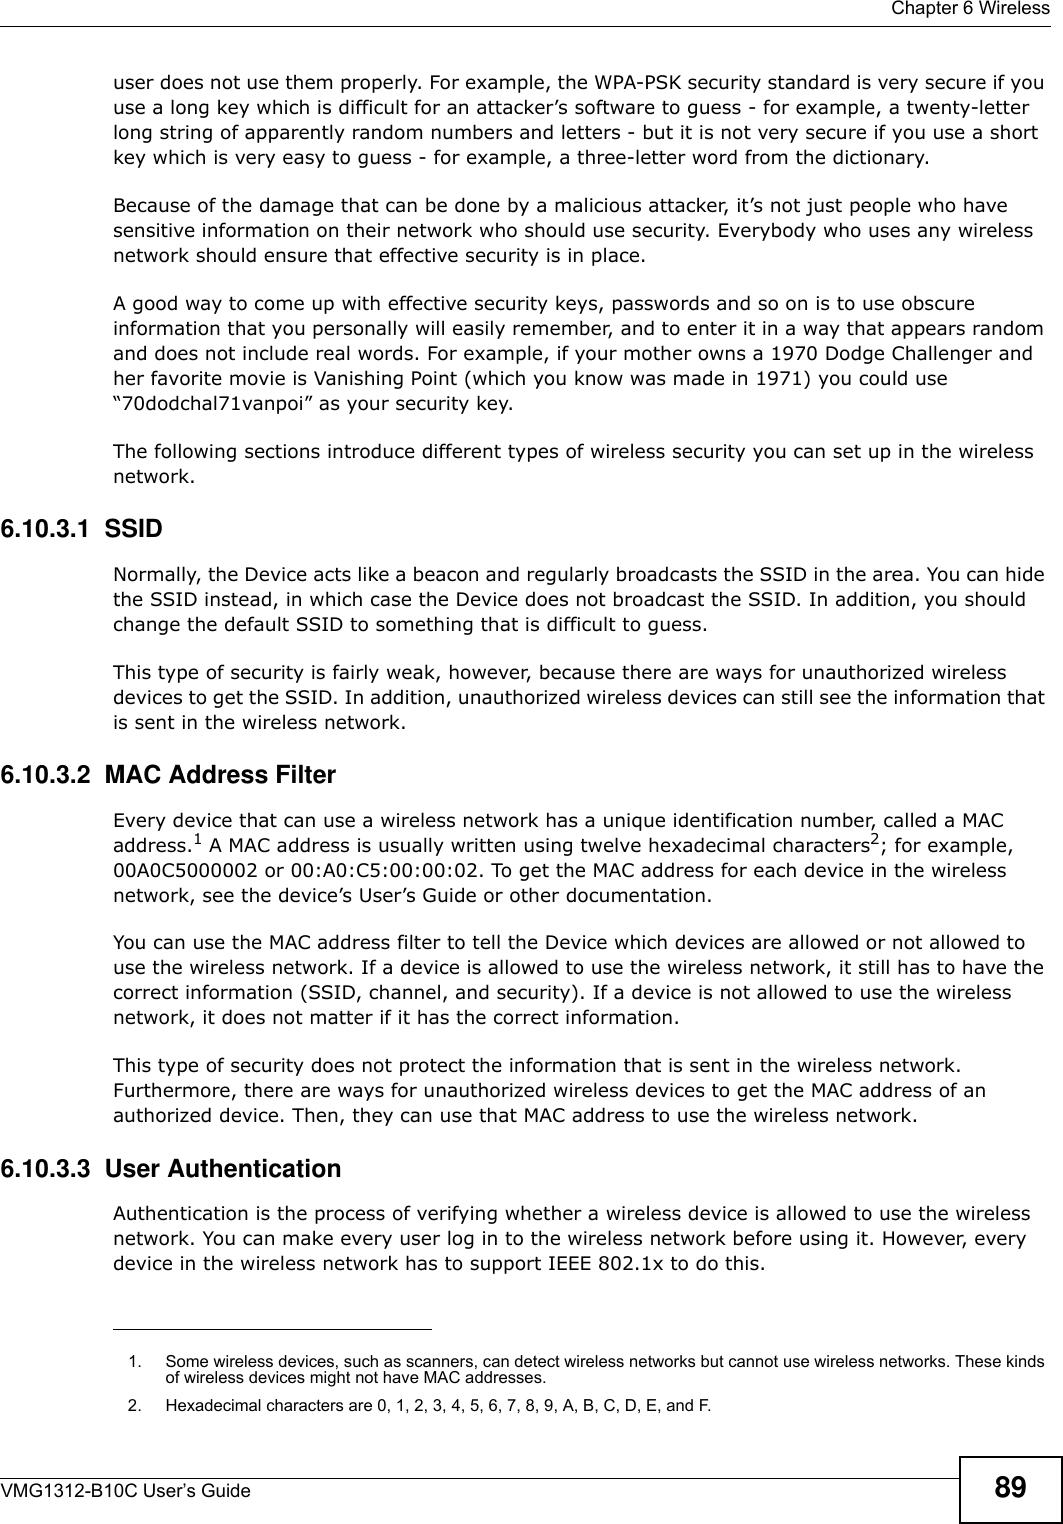  Chapter 6 WirelessVMG1312-B10C User’s Guide 89user does not use them properly. For example, the WPA-PSK security standard is very secure if you use a long key which is difficult for an attacker’s software to guess - for example, a twenty-letter long string of apparently random numbers and letters - but it is not very secure if you use a short key which is very easy to guess - for example, a three-letter word from the dictionary.Because of the damage that can be done by a malicious attacker, it’s not just people who have sensitive information on their network who should use security. Everybody who uses any wireless network should ensure that effective security is in place.A good way to come up with effective security keys, passwords and so on is to use obscure information that you personally will easily remember, and to enter it in a way that appears random and does not include real words. For example, if your mother owns a 1970 Dodge Challenger and her favorite movie is Vanishing Point (which you know was made in 1971) you could use “70dodchal71vanpoi” as your security key.The following sections introduce different types of wireless security you can set up in the wireless network.6.10.3.1  SSIDNormally, the Device acts like a beacon and regularly broadcasts the SSID in the area. You can hide the SSID instead, in which case the Device does not broadcast the SSID. In addition, you should change the default SSID to something that is difficult to guess.This type of security is fairly weak, however, because there are ways for unauthorized wireless devices to get the SSID. In addition, unauthorized wireless devices can still see the information that is sent in the wireless network.6.10.3.2  MAC Address FilterEvery device that can use a wireless network has a unique identification number, called a MAC address.1 A MAC address is usually written using twelve hexadecimal characters2; for example, 00A0C5000002 or 00:A0:C5:00:00:02. To get the MAC address for each device in the wireless network, see the device’s User’s Guide or other documentation.You can use the MAC address filter to tell the Device which devices are allowed or not allowed to use the wireless network. If a device is allowed to use the wireless network, it still has to have the correct information (SSID, channel, and security). If a device is not allowed to use the wireless network, it does not matter if it has the correct information.This type of security does not protect the information that is sent in the wireless network. Furthermore, there are ways for unauthorized wireless devices to get the MAC address of an authorized device. Then, they can use that MAC address to use the wireless network.6.10.3.3  User AuthenticationAuthentication is the process of verifying whether a wireless device is allowed to use the wireless network. You can make every user log in to the wireless network before using it. However, every device in the wireless network has to support IEEE 802.1x to do this.1. Some wireless devices, such as scanners, can detect wireless networks but cannot use wireless networks. These kinds of wireless devices might not have MAC addresses.2. Hexadecimal characters are 0, 1, 2, 3, 4, 5, 6, 7, 8, 9, A, B, C, D, E, and F.